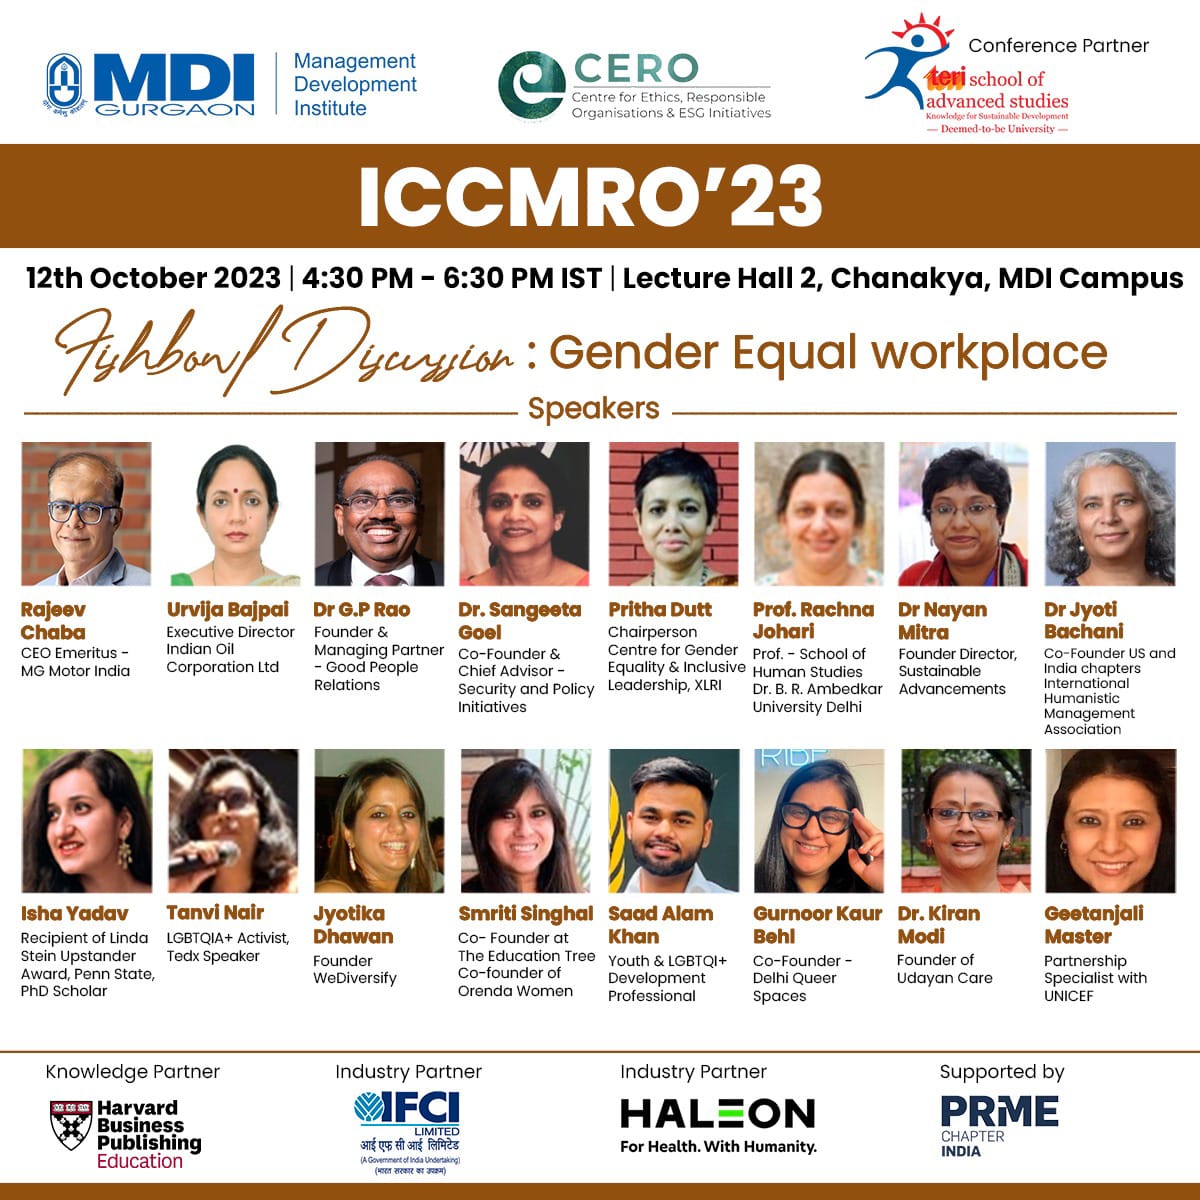 #CERO at MDI Gurgaon welcomes you to an insightful #Fishbowl discussion on ‘Gender Equal Workplace’ as a part of International Conference on Creating & Managing Responsible (ICCMRO’23). Date 📅- 12th October 2023 Time 🕙- 4:30 to 6:30 PM Venue 📍- Lecture Hall 2 (Chanakya), MDI